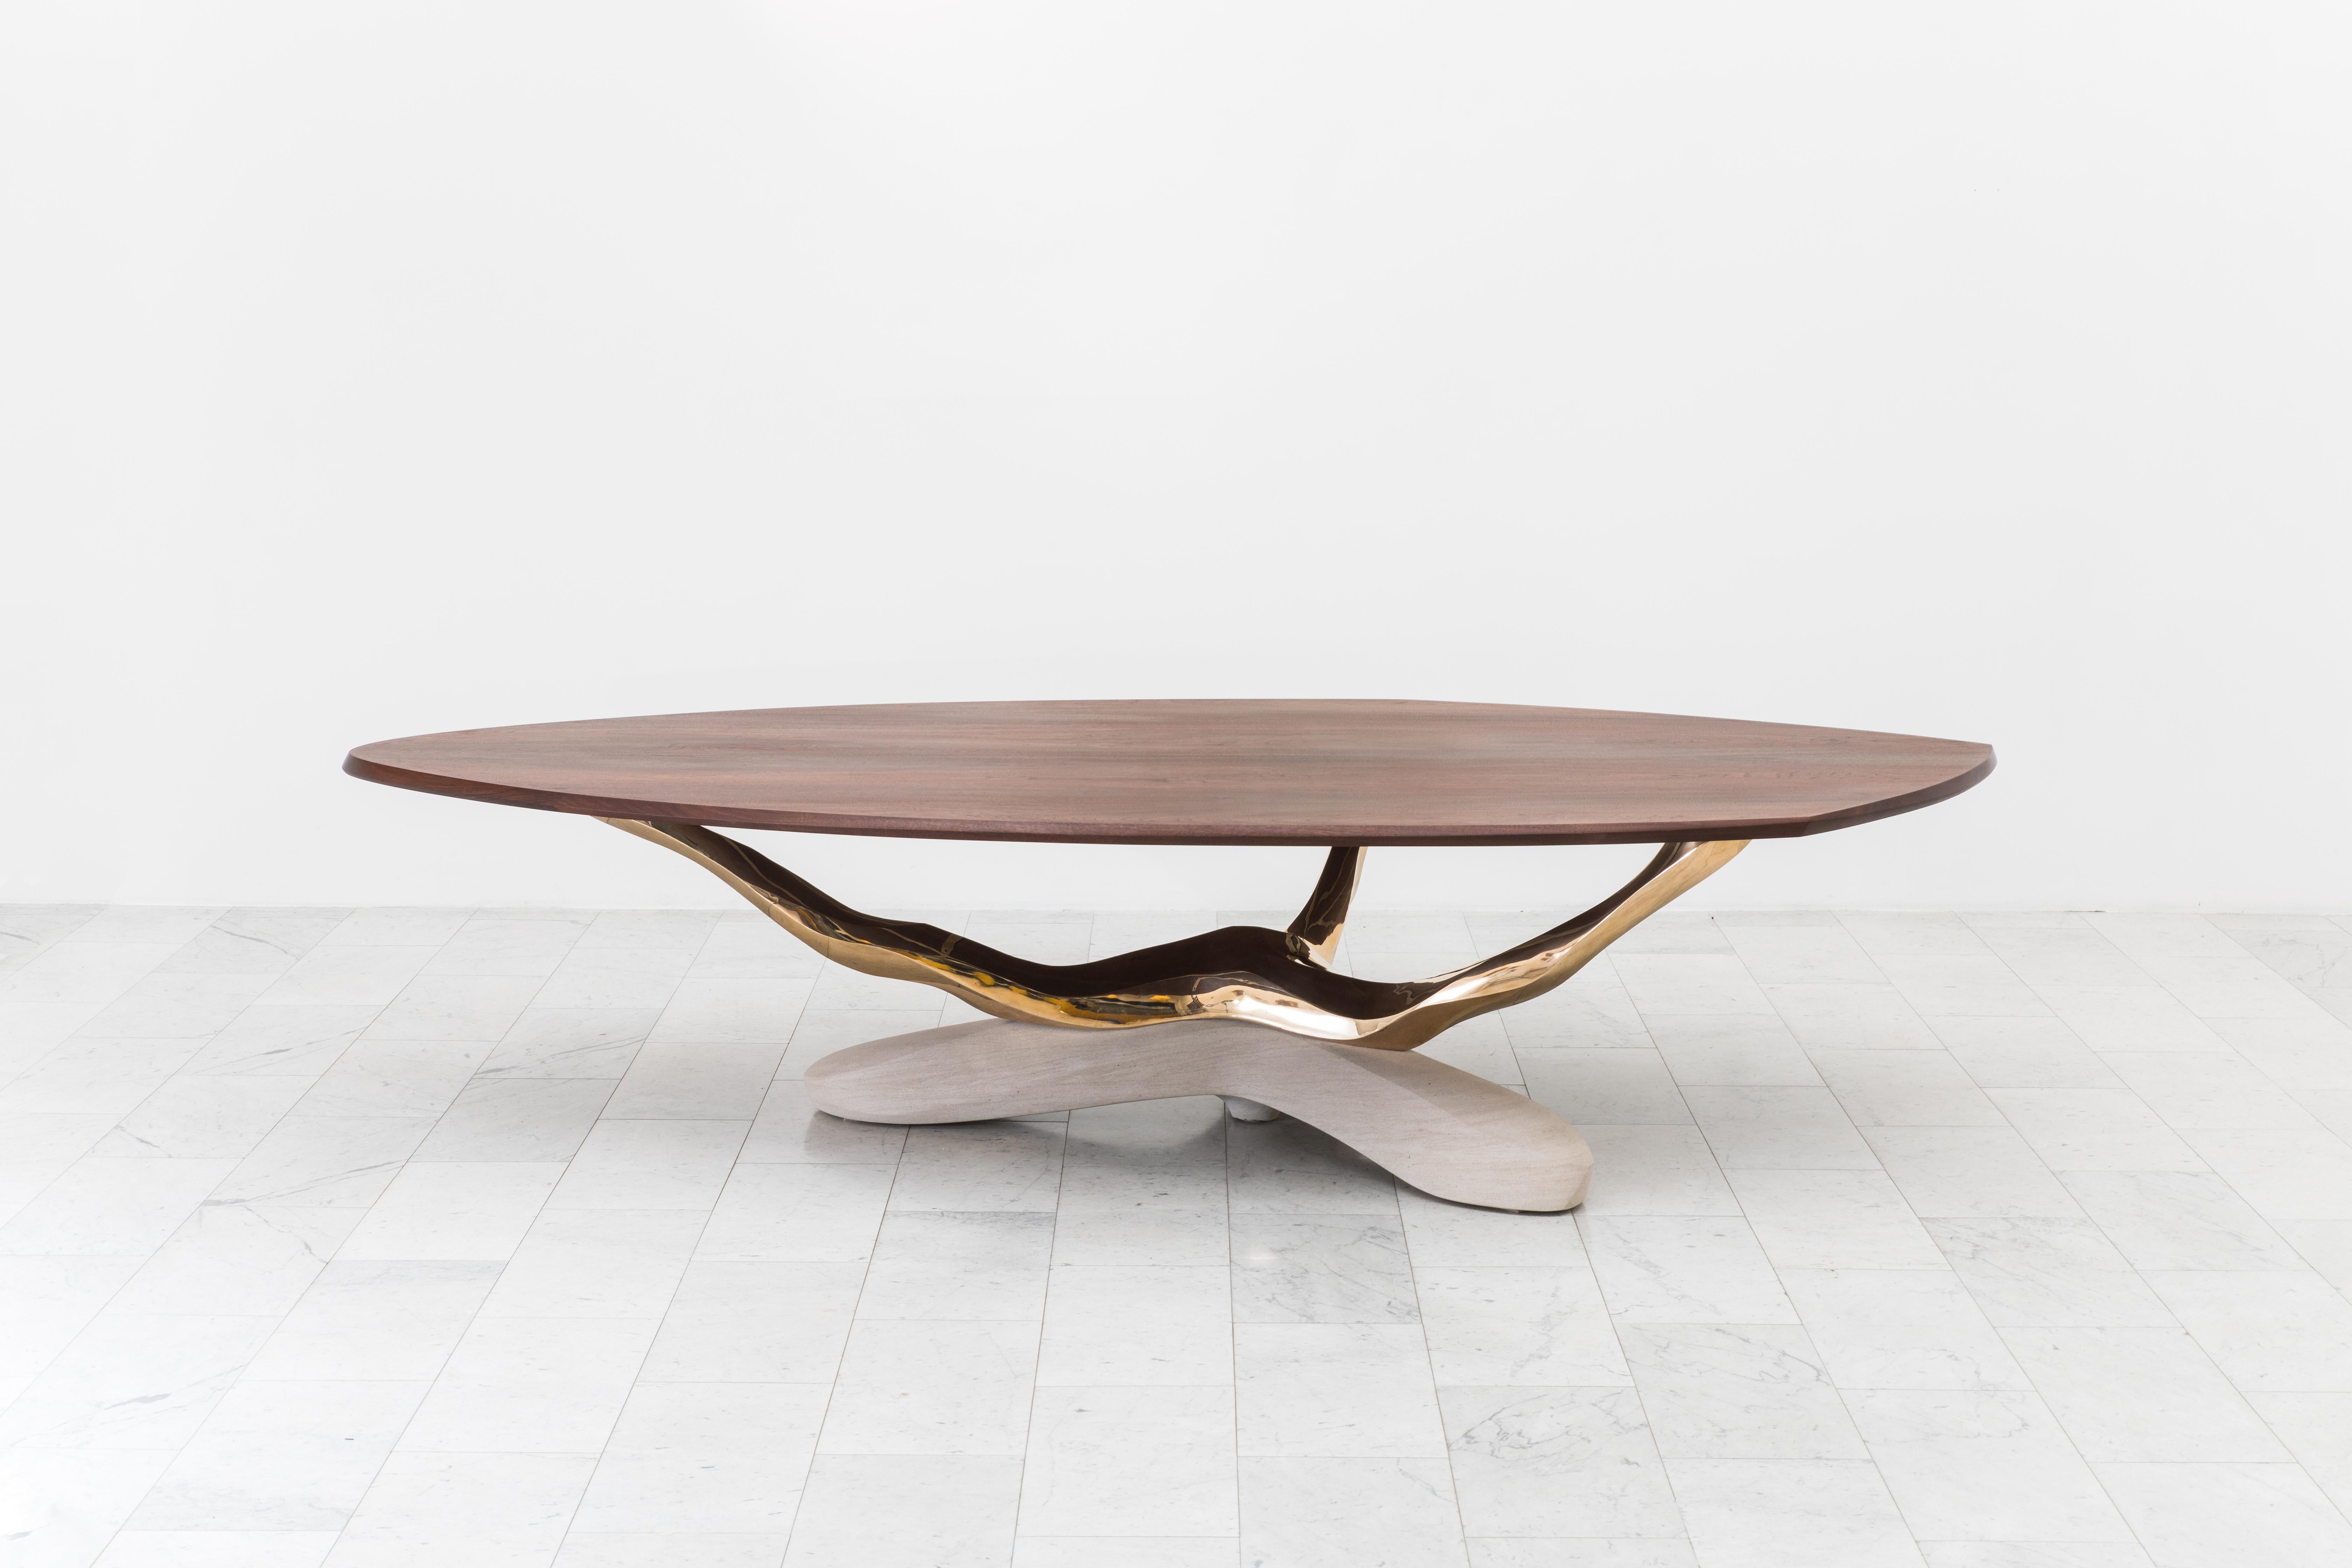 Markus Haase, Bronze, Walnut, and Limestone Dining Table, USA, 2018 For Sale